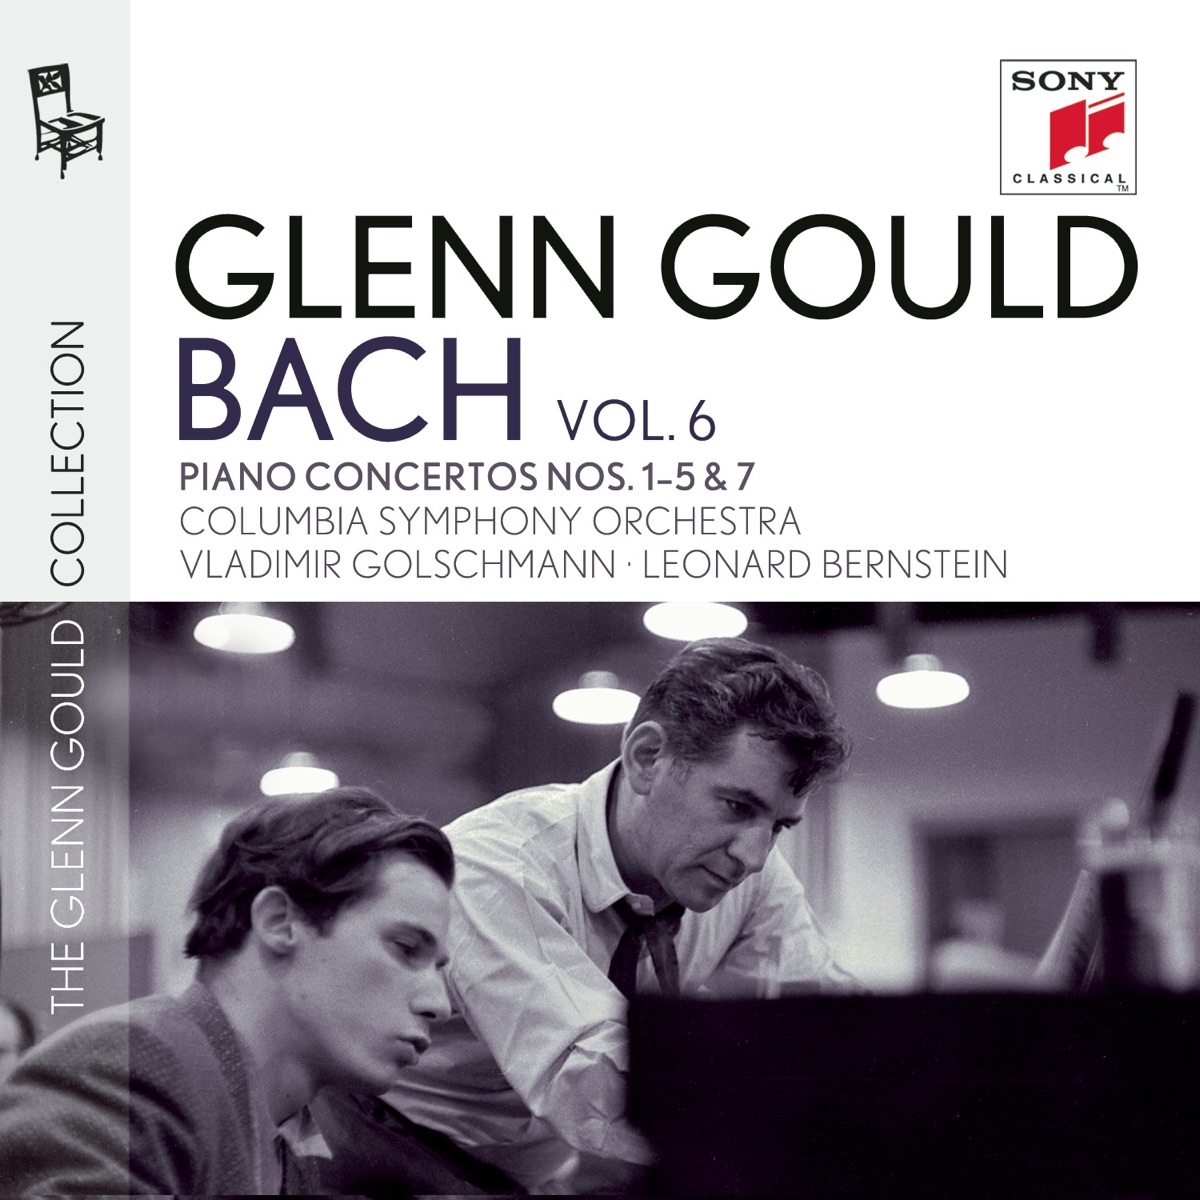 Brahms: Concerto for Piano and Orchestra No. 1 in D Minor, Op. 15 by Glenn  Gould, Leonard Bernstein & New York Philharmonic on Apple Music